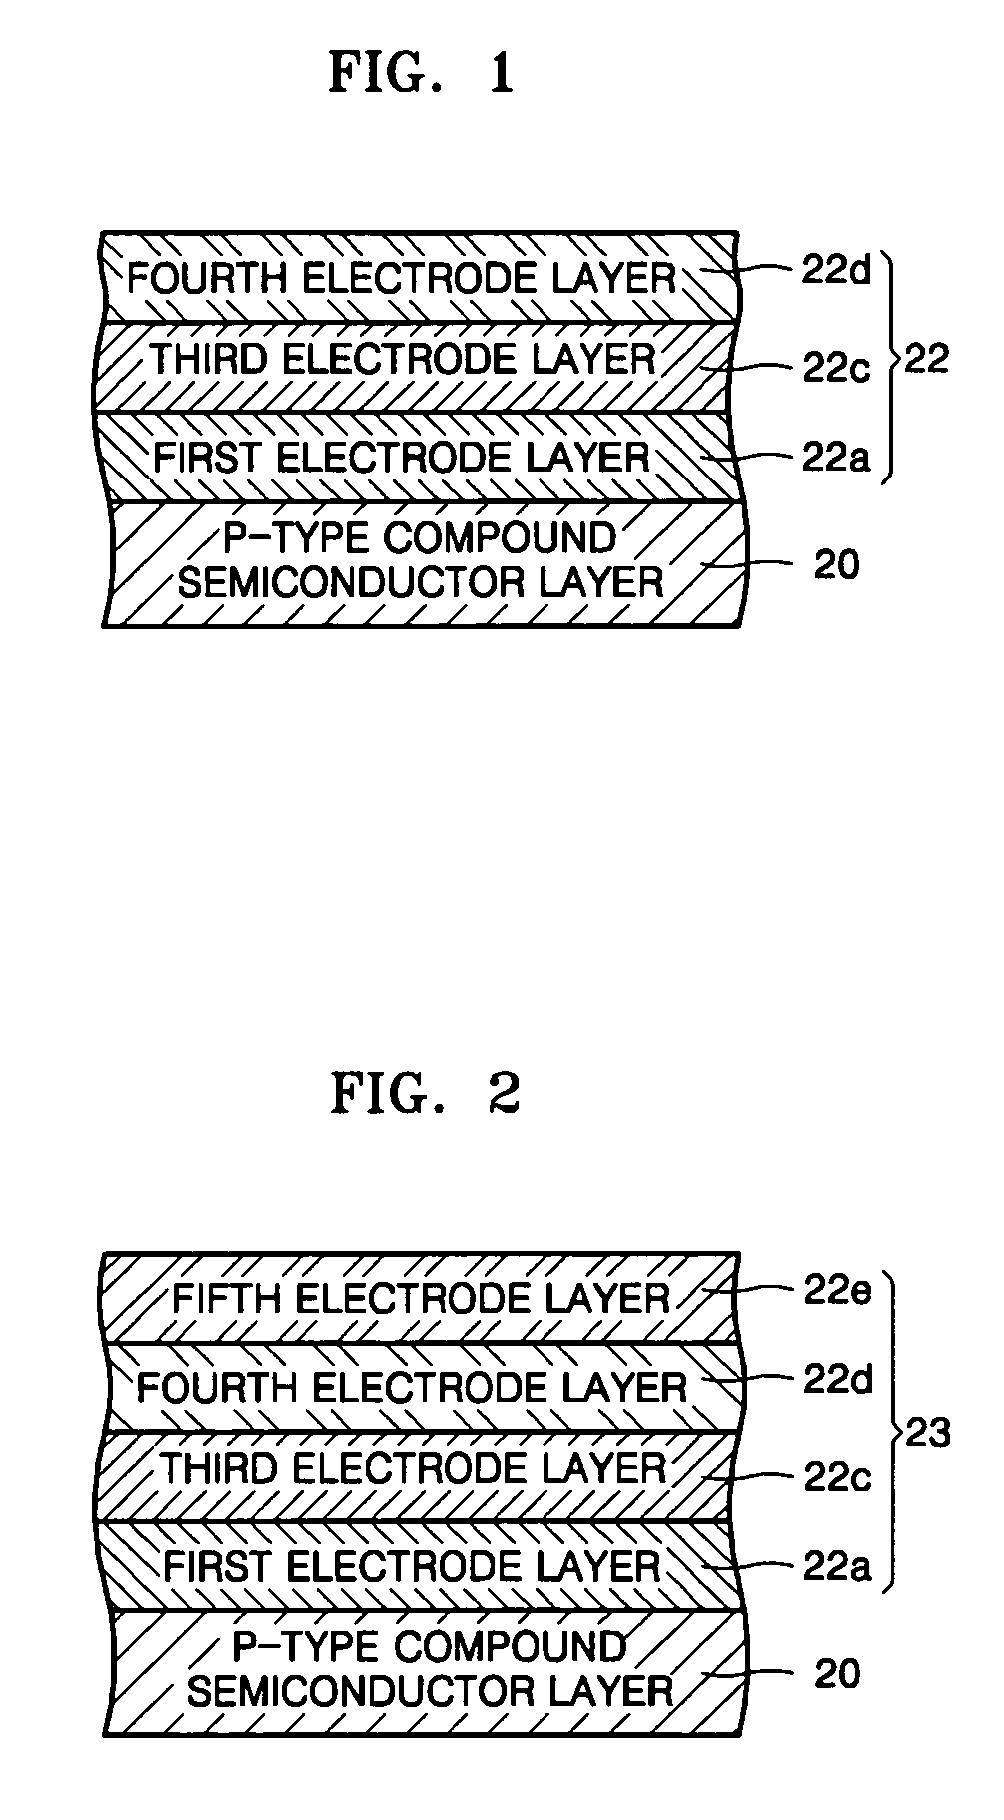 Reflective electrode and compound semiconductor light emitting device including the same